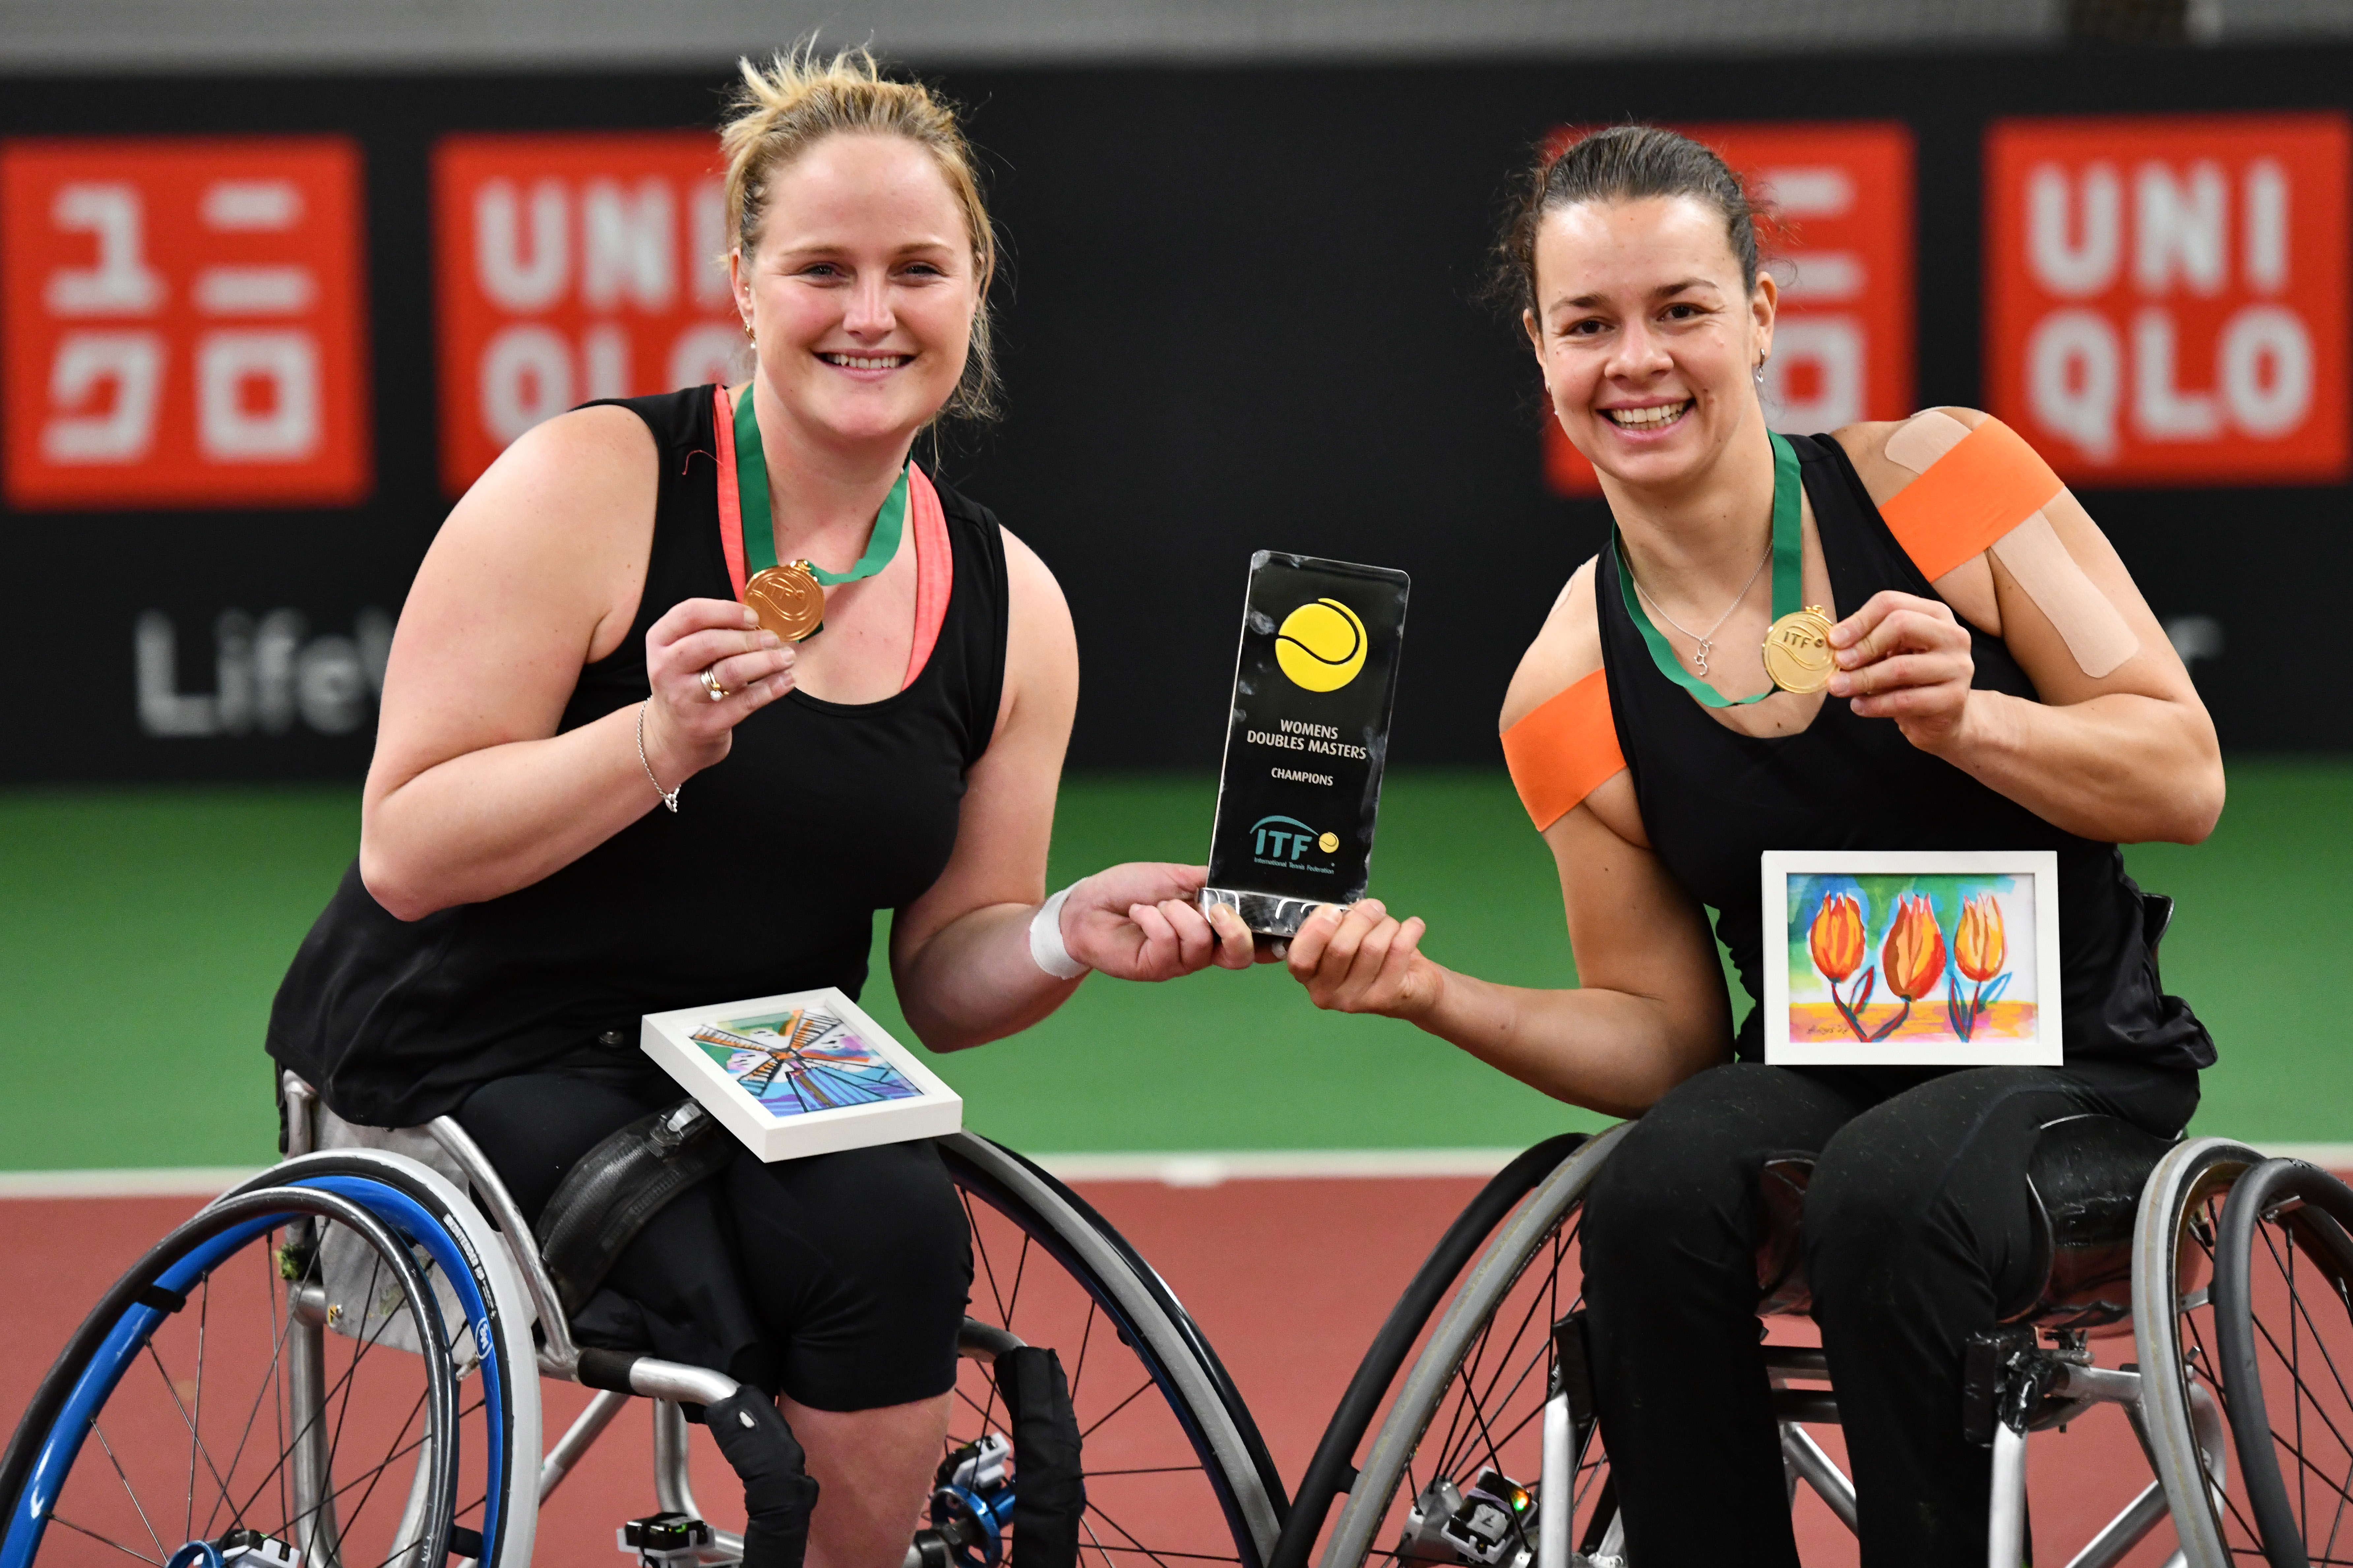 Marjolein Buis and Aniek van Koot won the 2018 Doubles Masters title on home soil in Netherlands